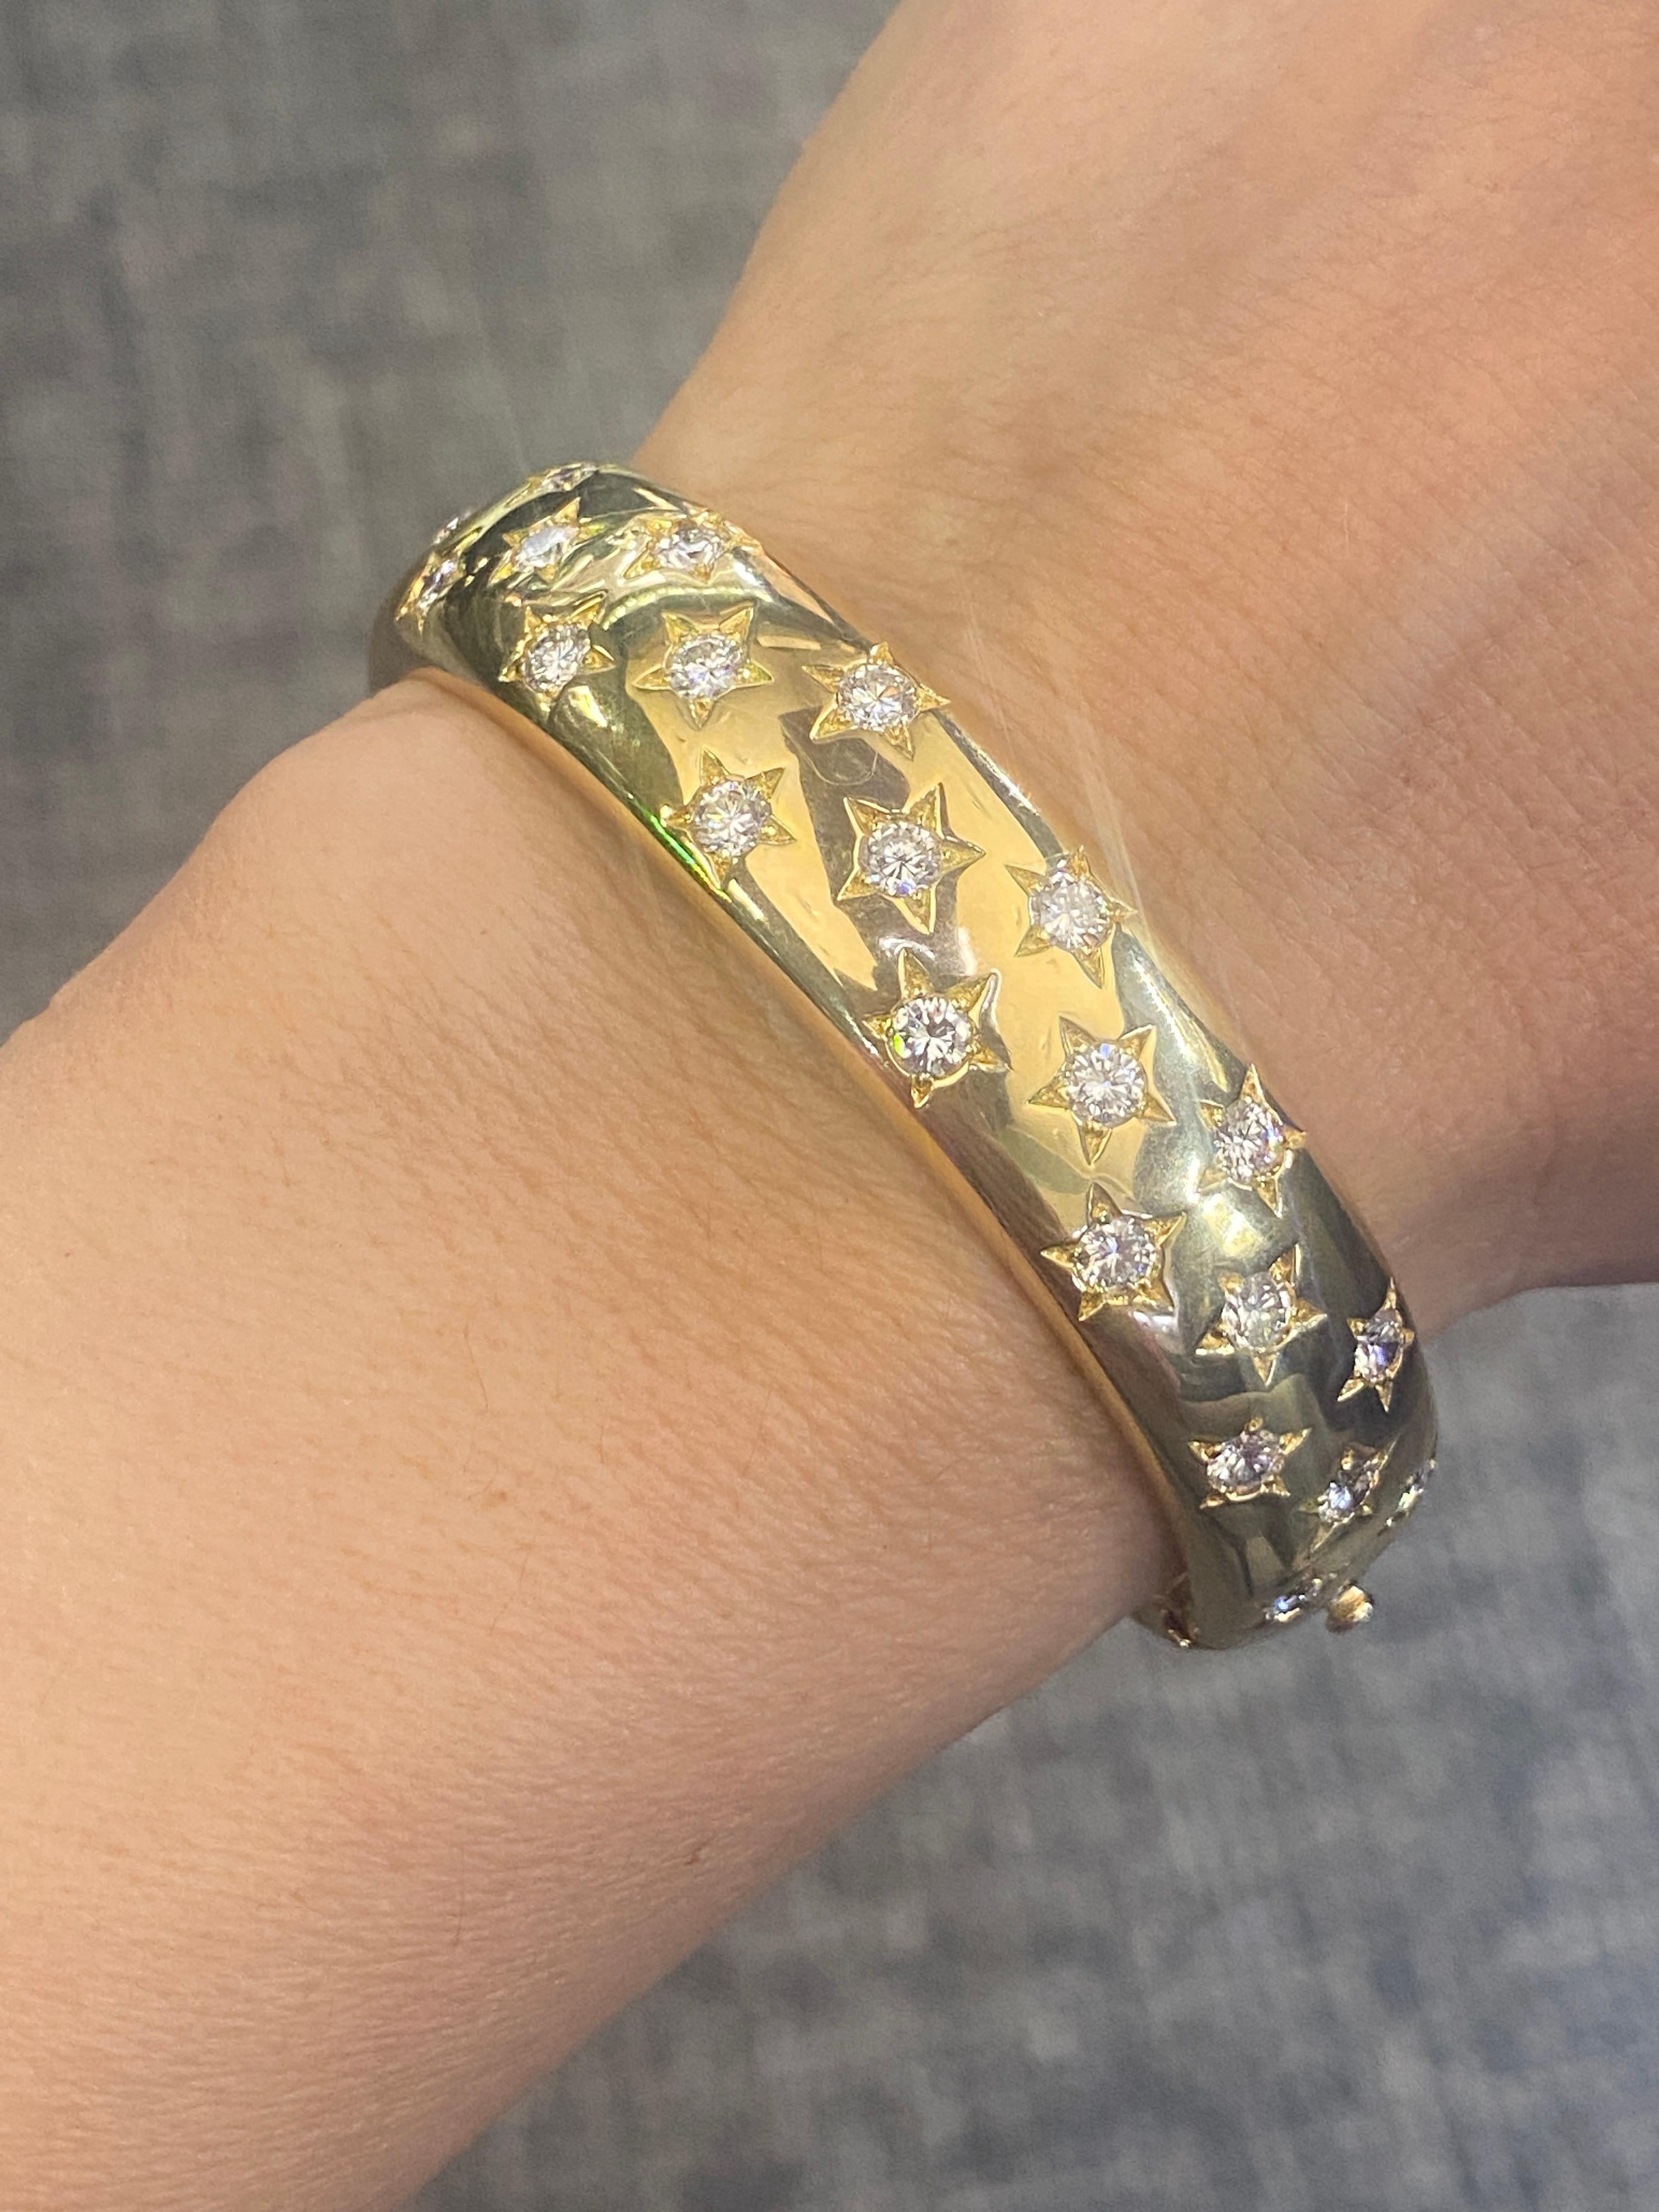 This striking 18k gold Cartier bangle is studded with approximately 6 1/2 carats of round cut diamonds. The circumference of the bangle measures 17cm. It is a delightful piece. 